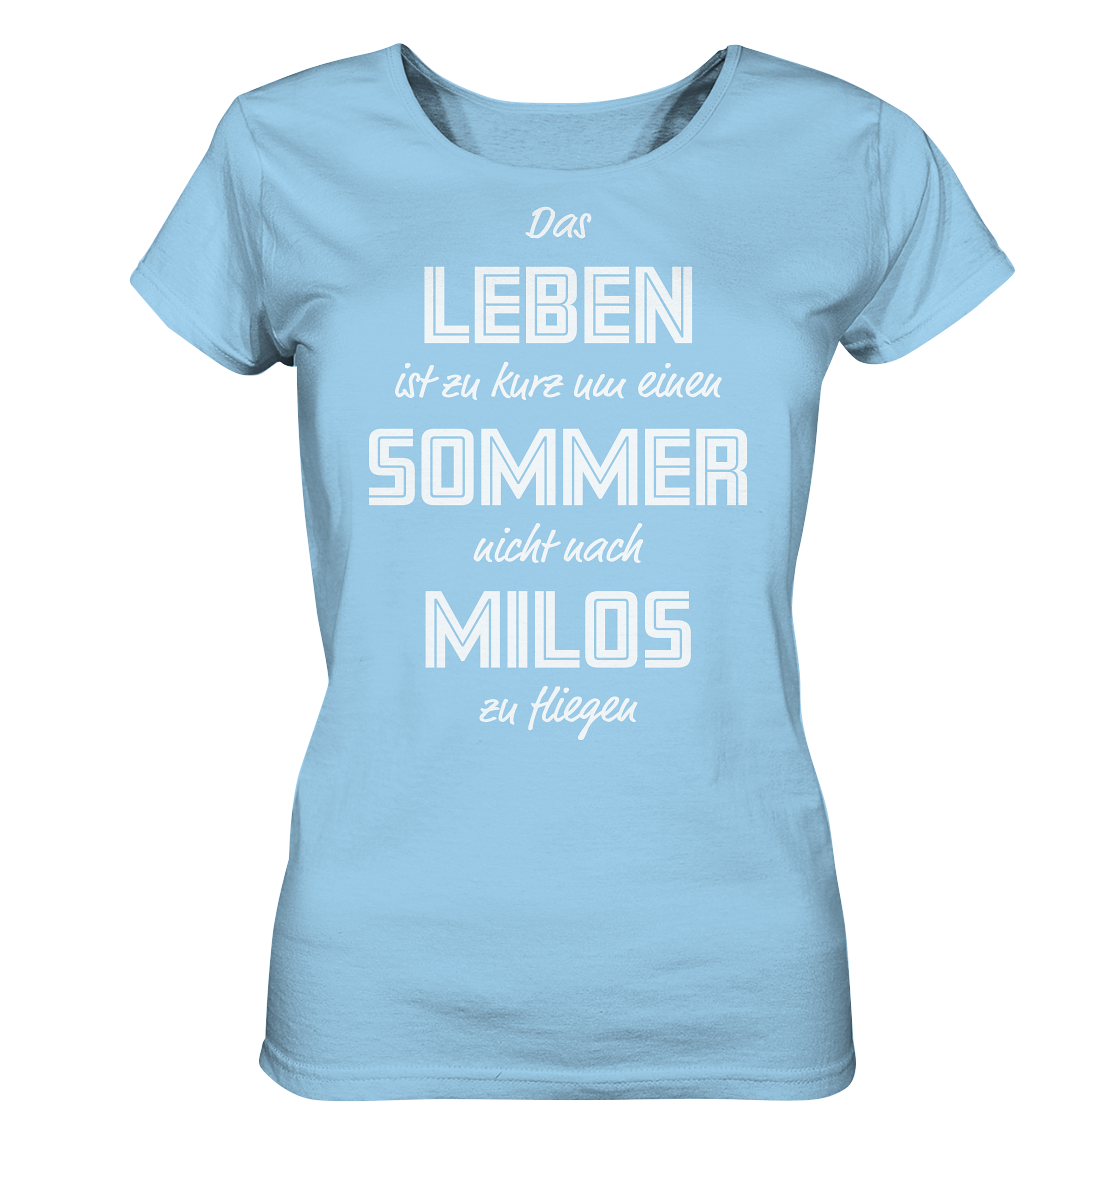 Life is too short not to fly to Milos for a summer - Ladies Organic Shirt